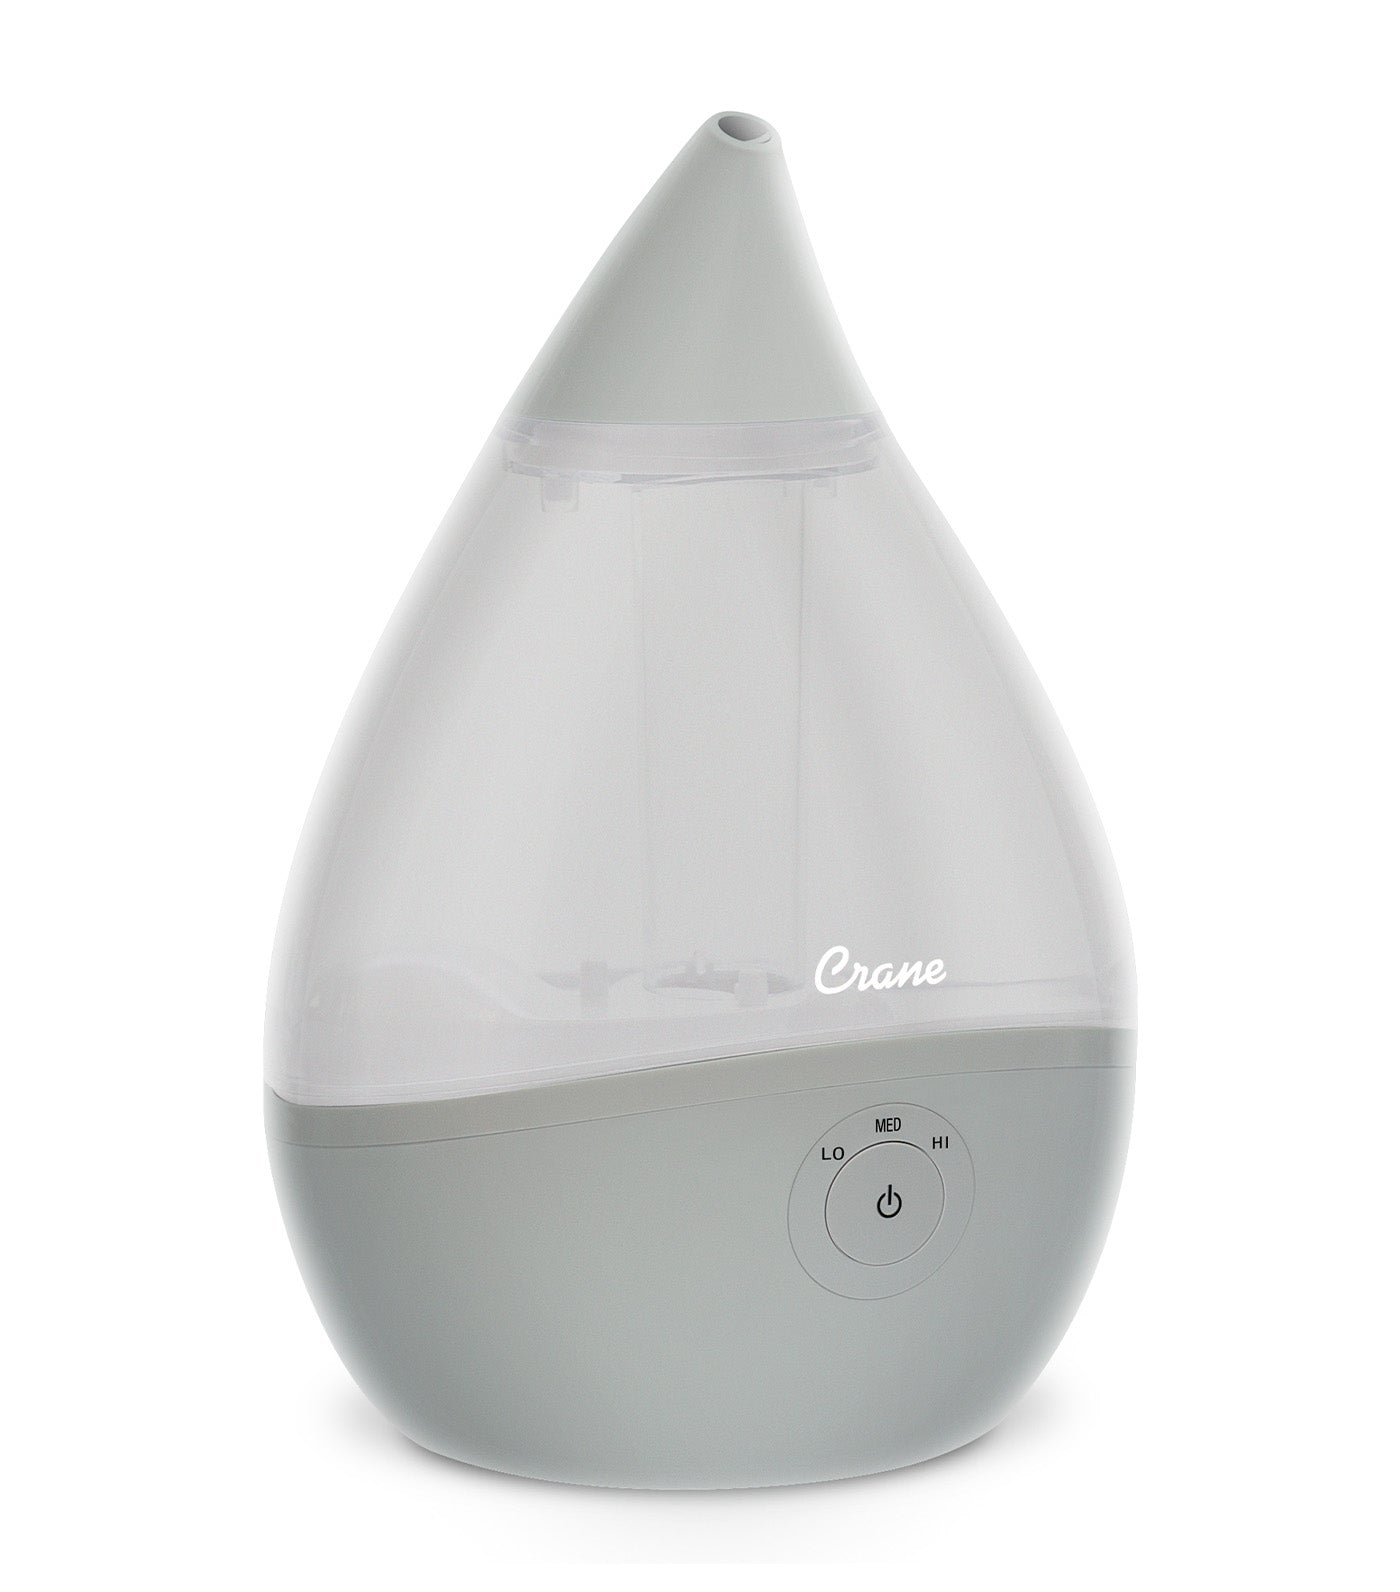 Droplet Filter-Free Cool Mist Humidifier with Vaporizer Function for Inhalation - Gray